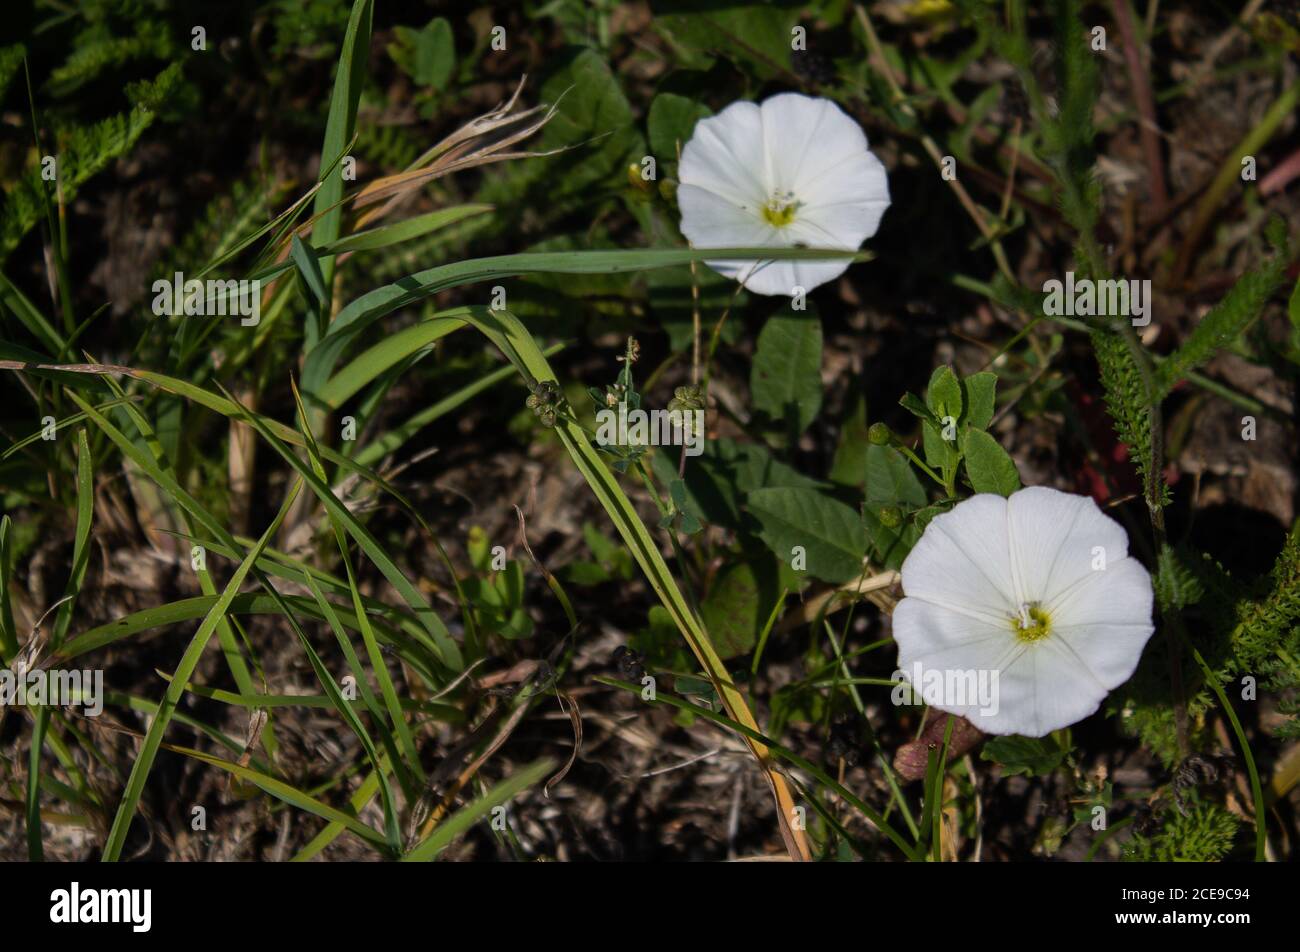 Bindweed is a climbing plant, however, photographed here on the ground. Stock Photo